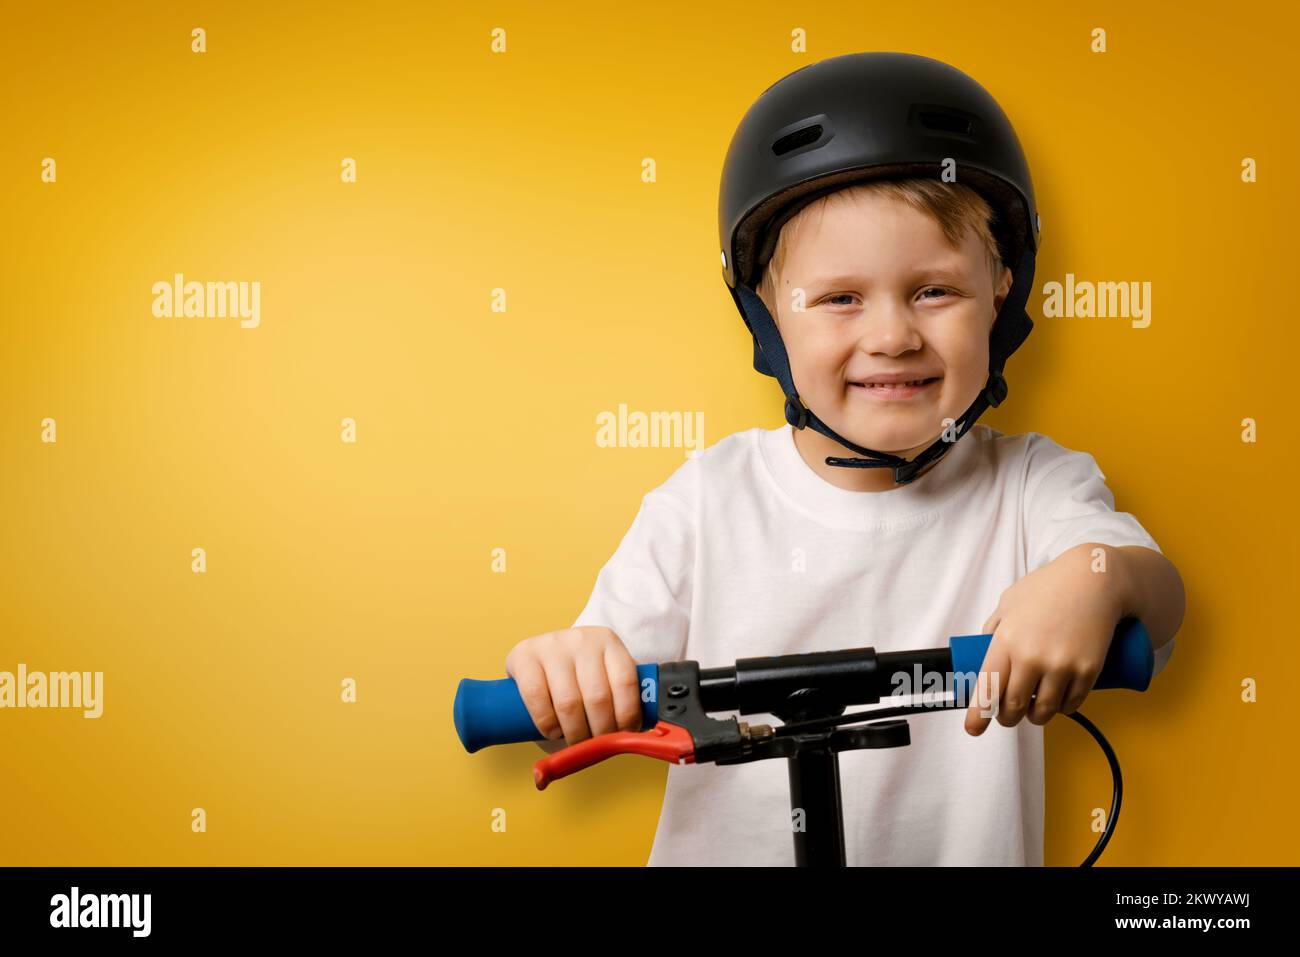 young smiling boy with helmet standing on kick scooter on yellow background with copy space Stock Photo